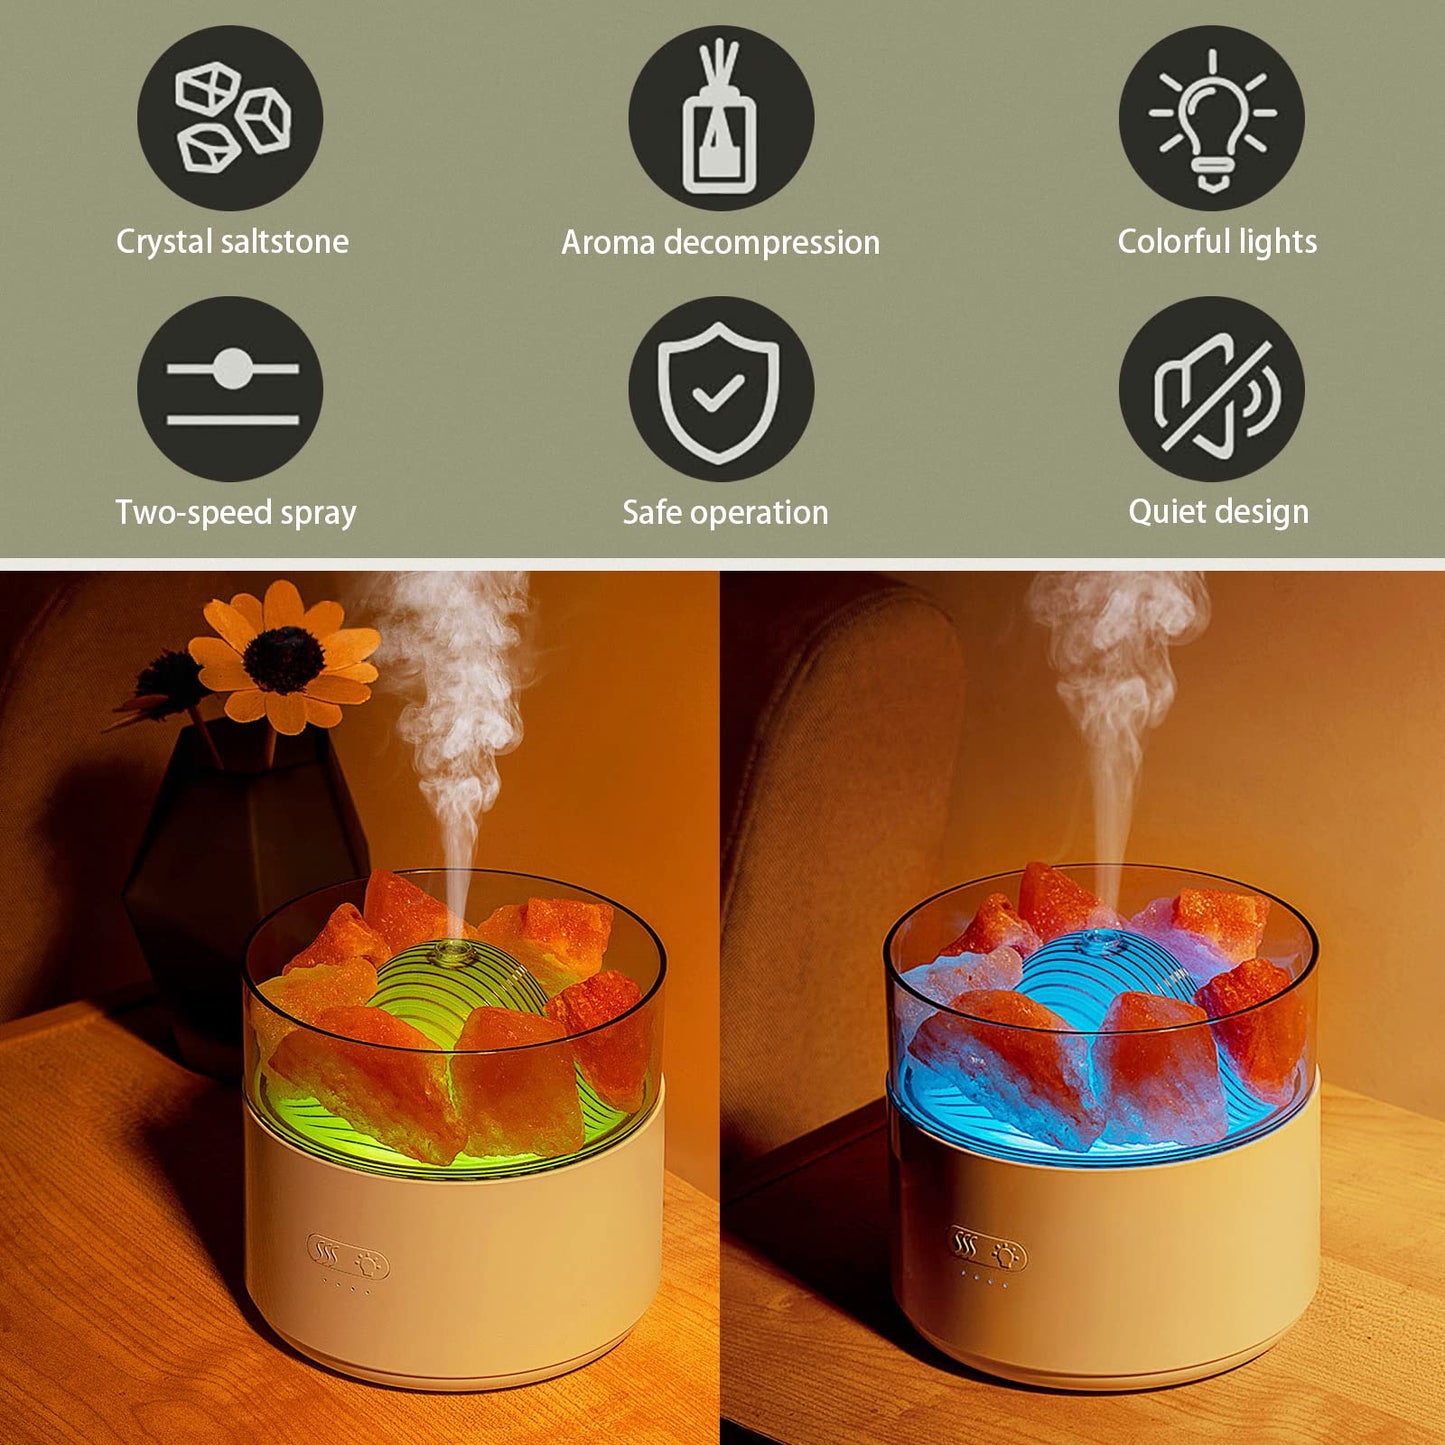 3 In 1 Air Humidifier Crystal Salt Aroma Diffuser, Essential Oil Lamp Diffusor Ambient Light